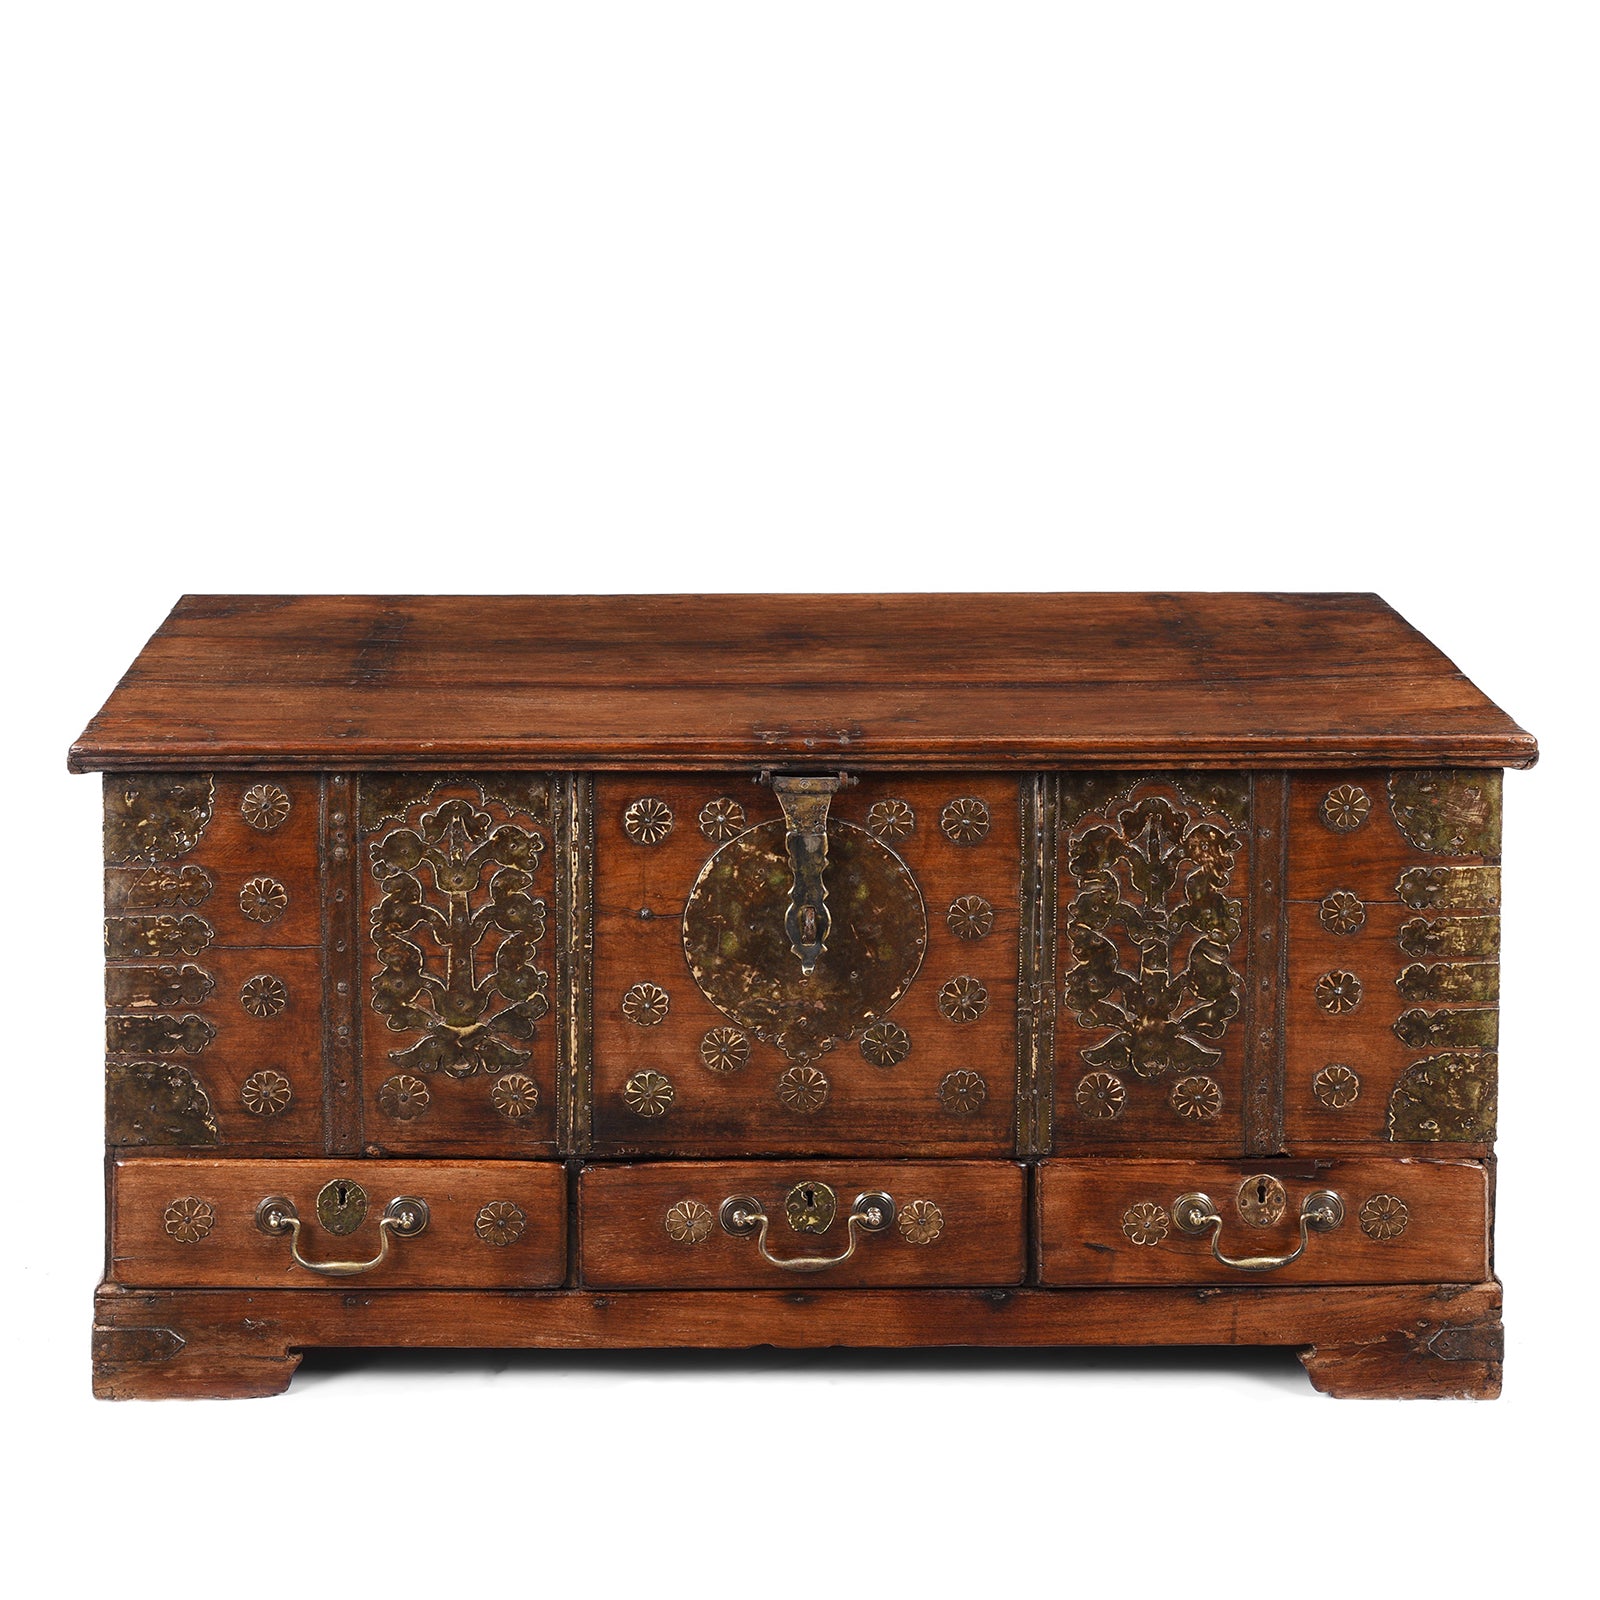 Antique Brass Bound Rosewood Chest From The Rann Of Kutch | Indigo Antiques